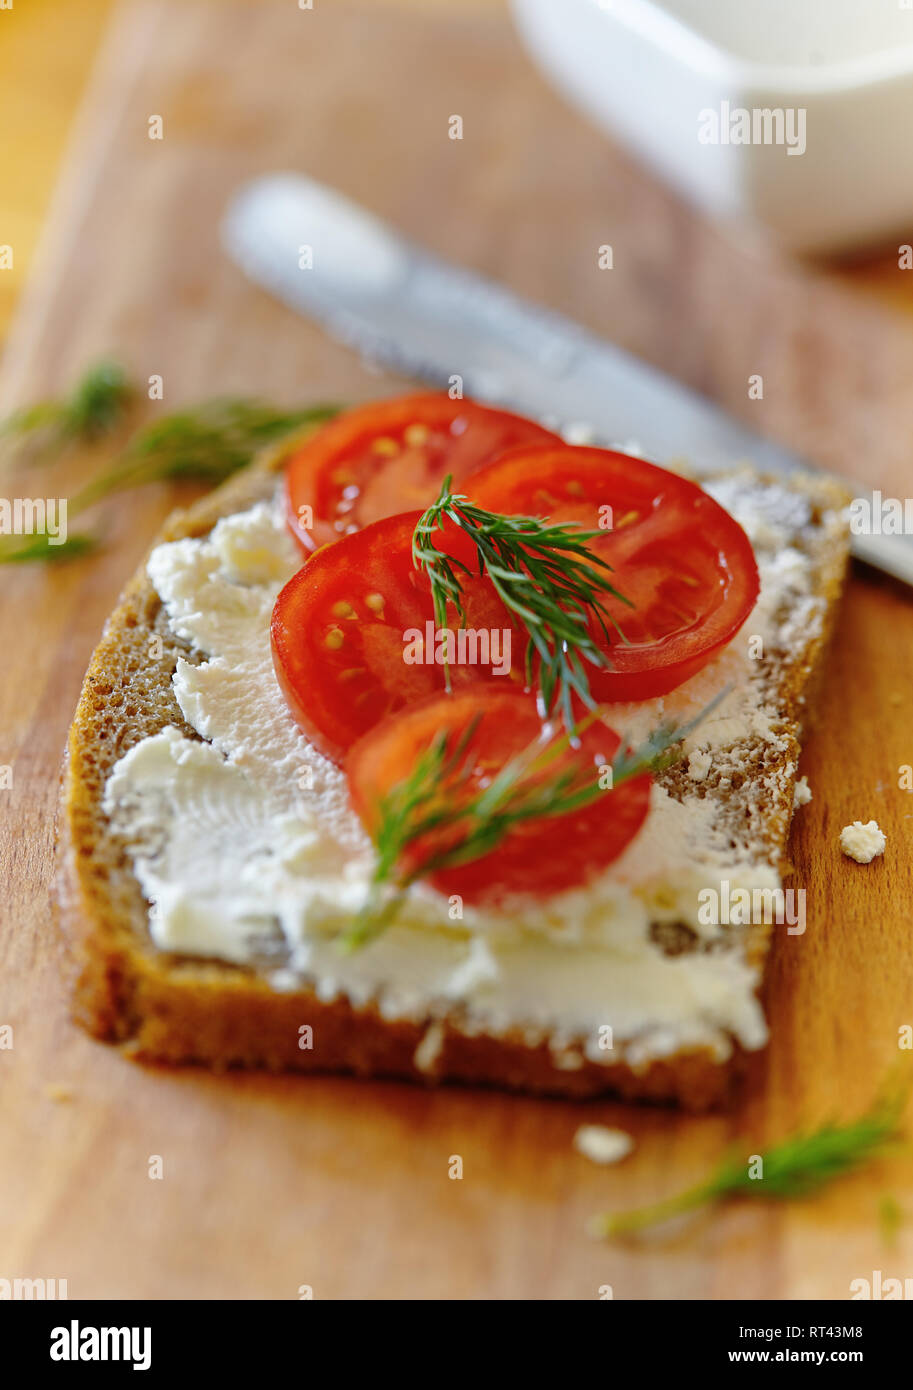 Bread with chees and tomato Stock Photo